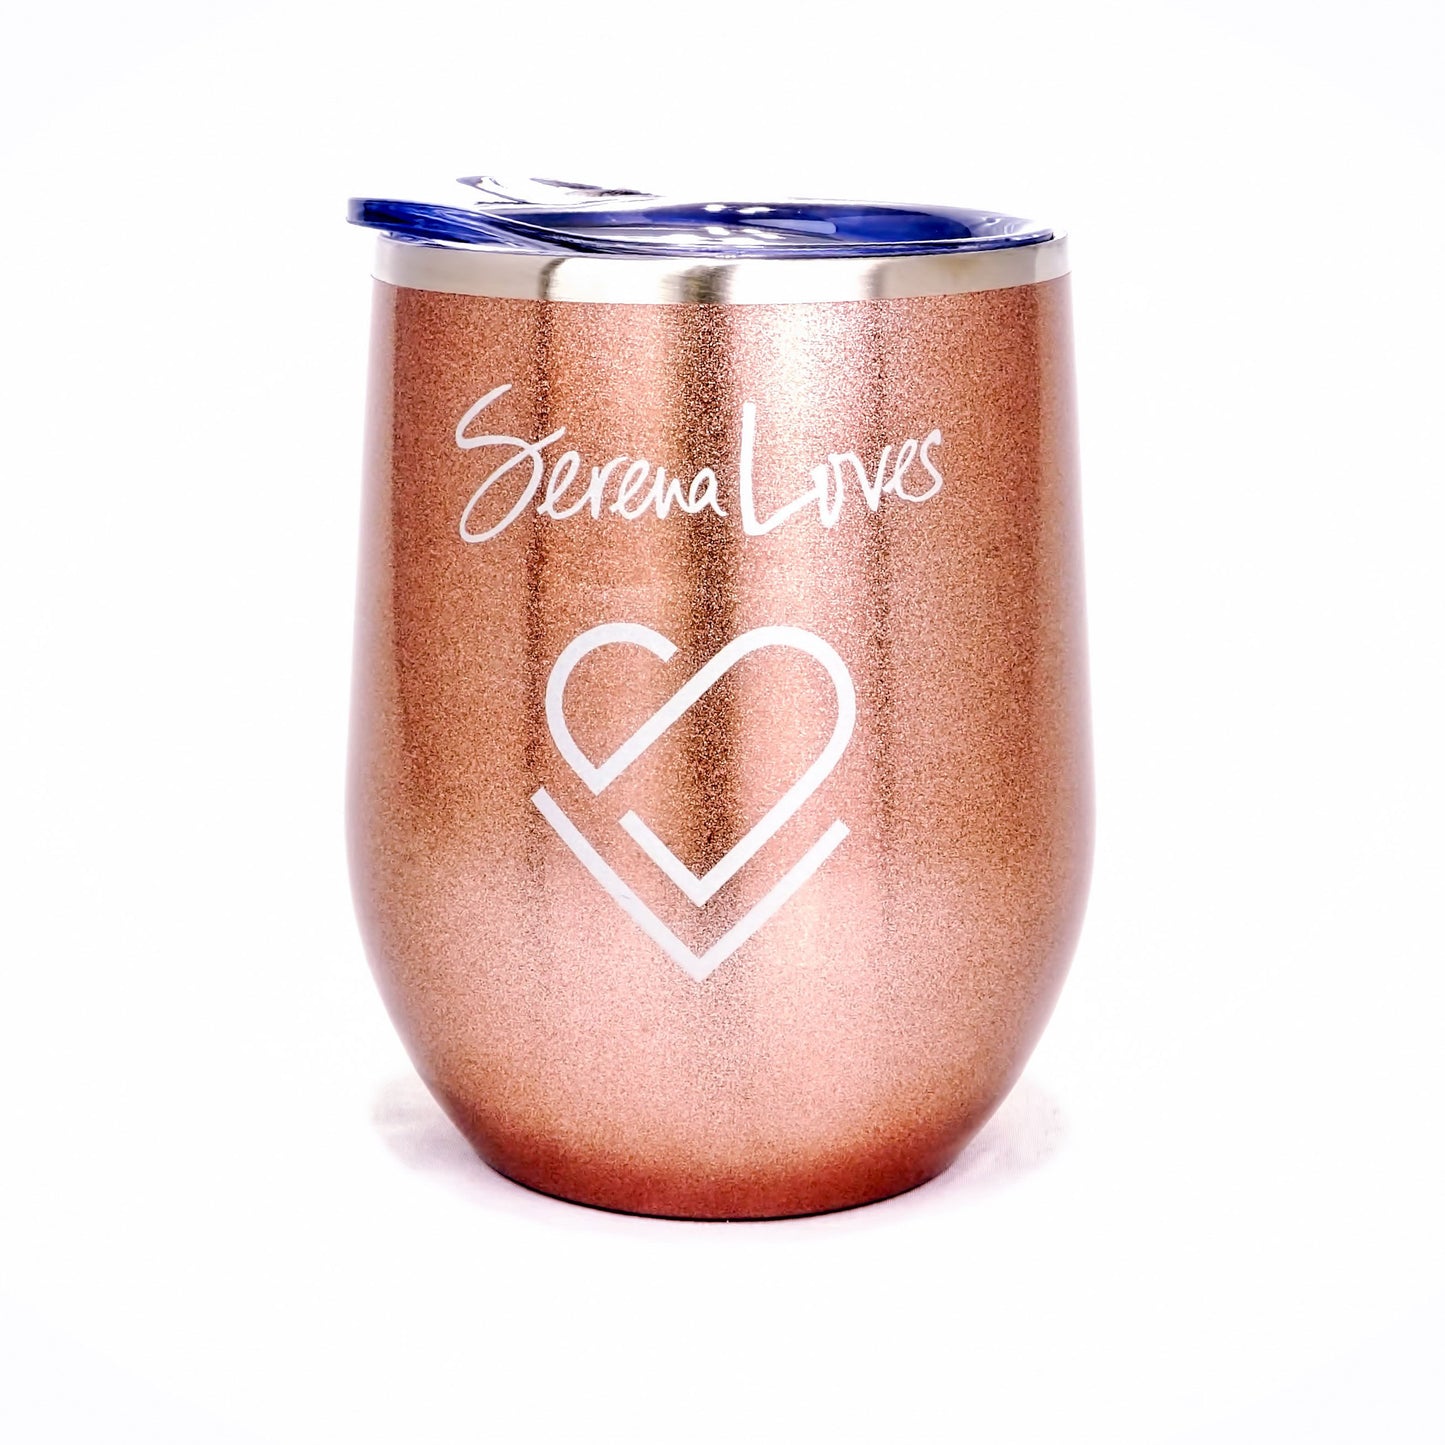 Serena Loves Stainless Steel Insulated Tumbler